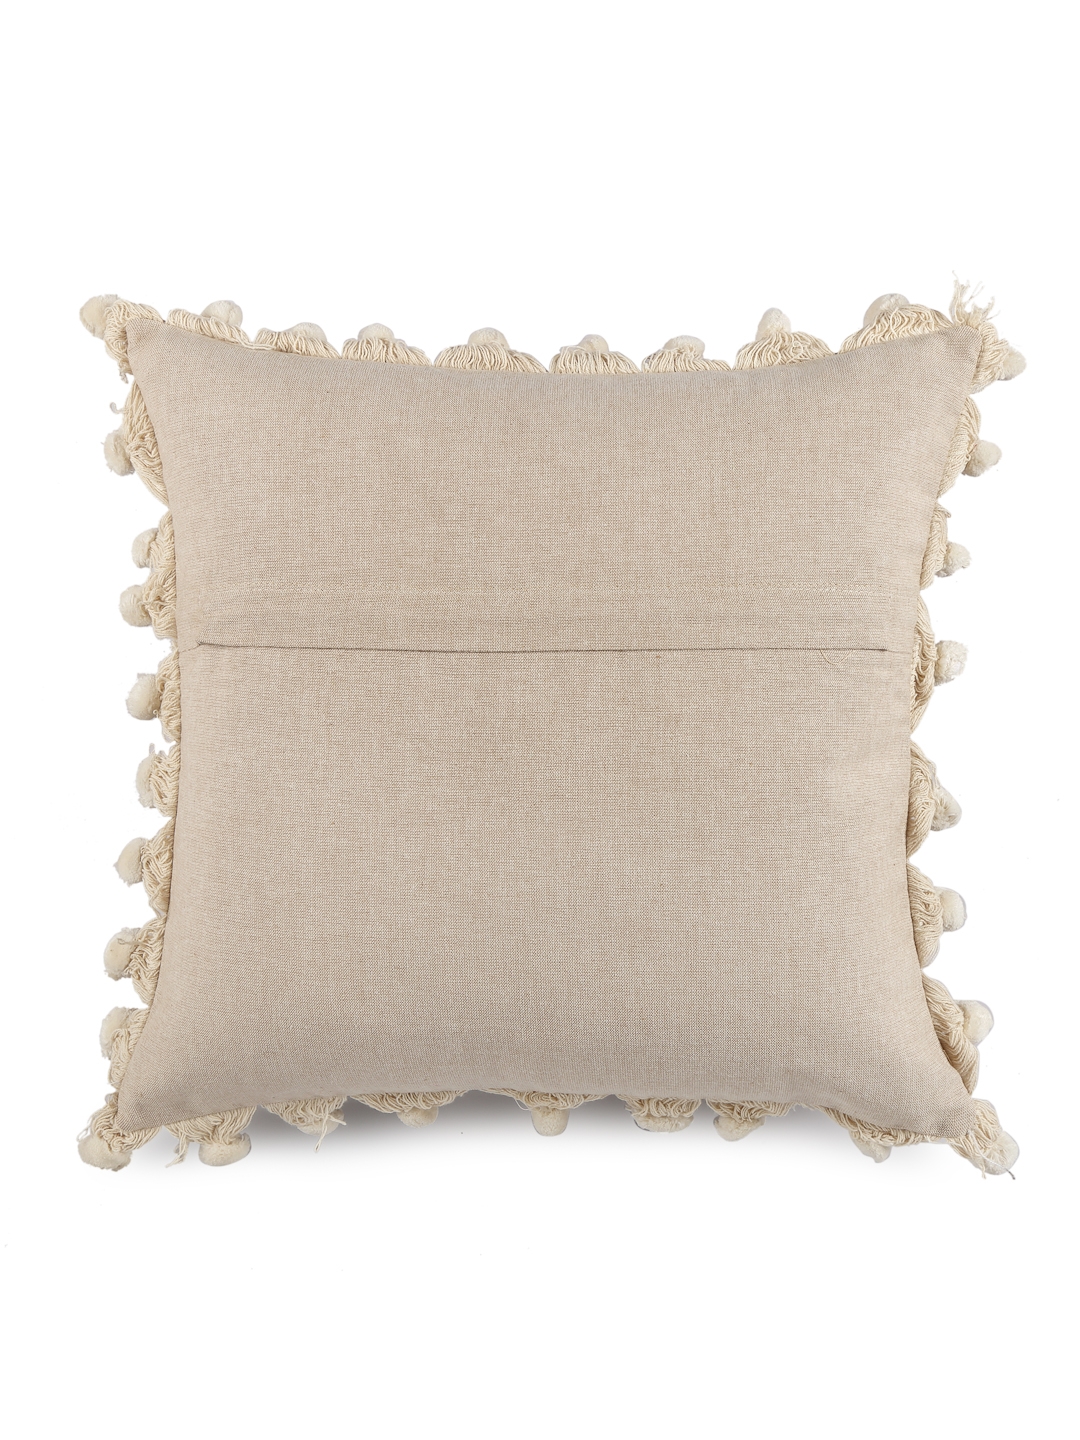 Cotton lace Detailed Cushion Cover